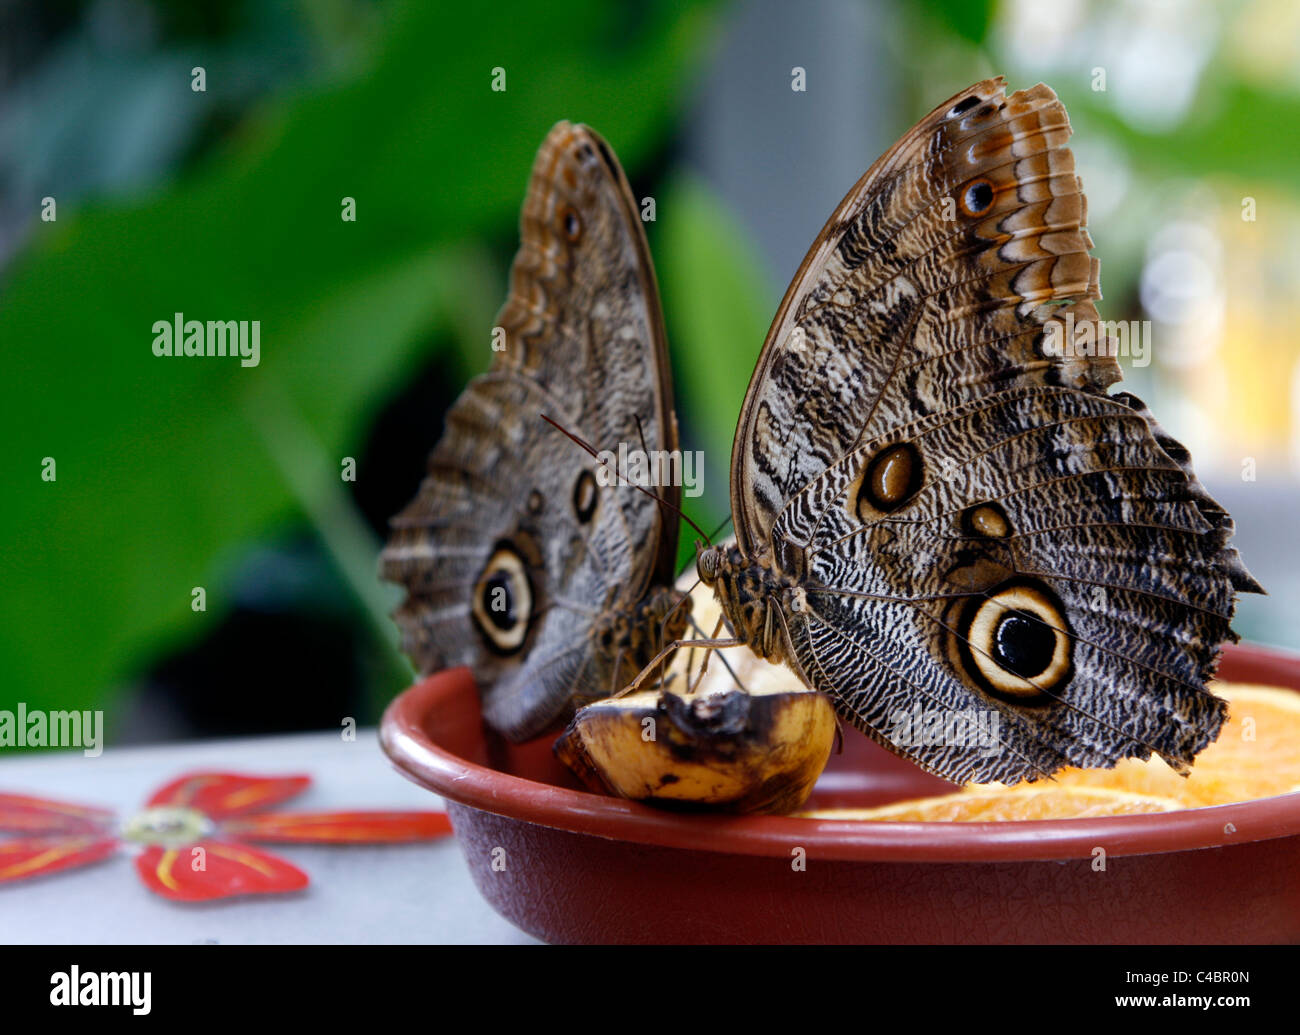 A couple of Forest Giant Owl butterflies (Caligo eurilochus) feeding on a plate with fruits. Butterfly house, Leipzig, Germany. Stock Photo